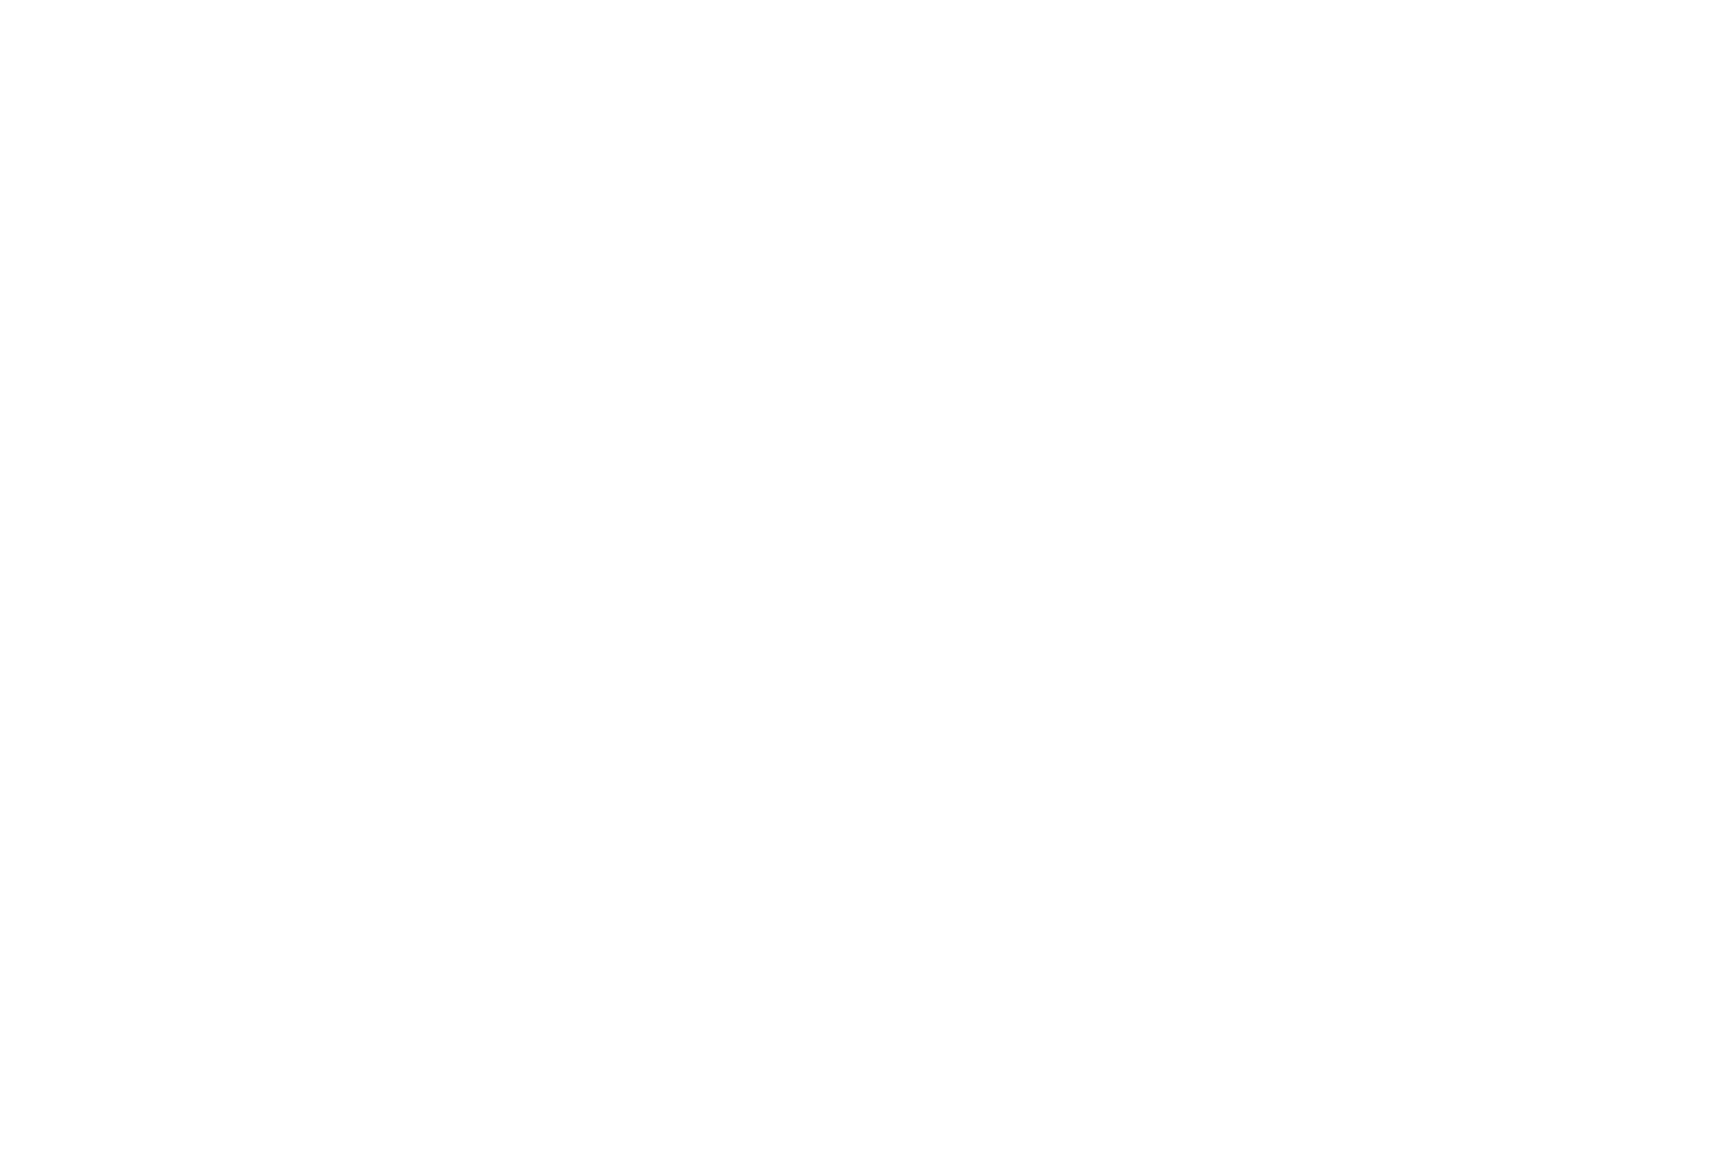 MUSIC VIDEO - 4th Dimension Independent Film Festival - 2020